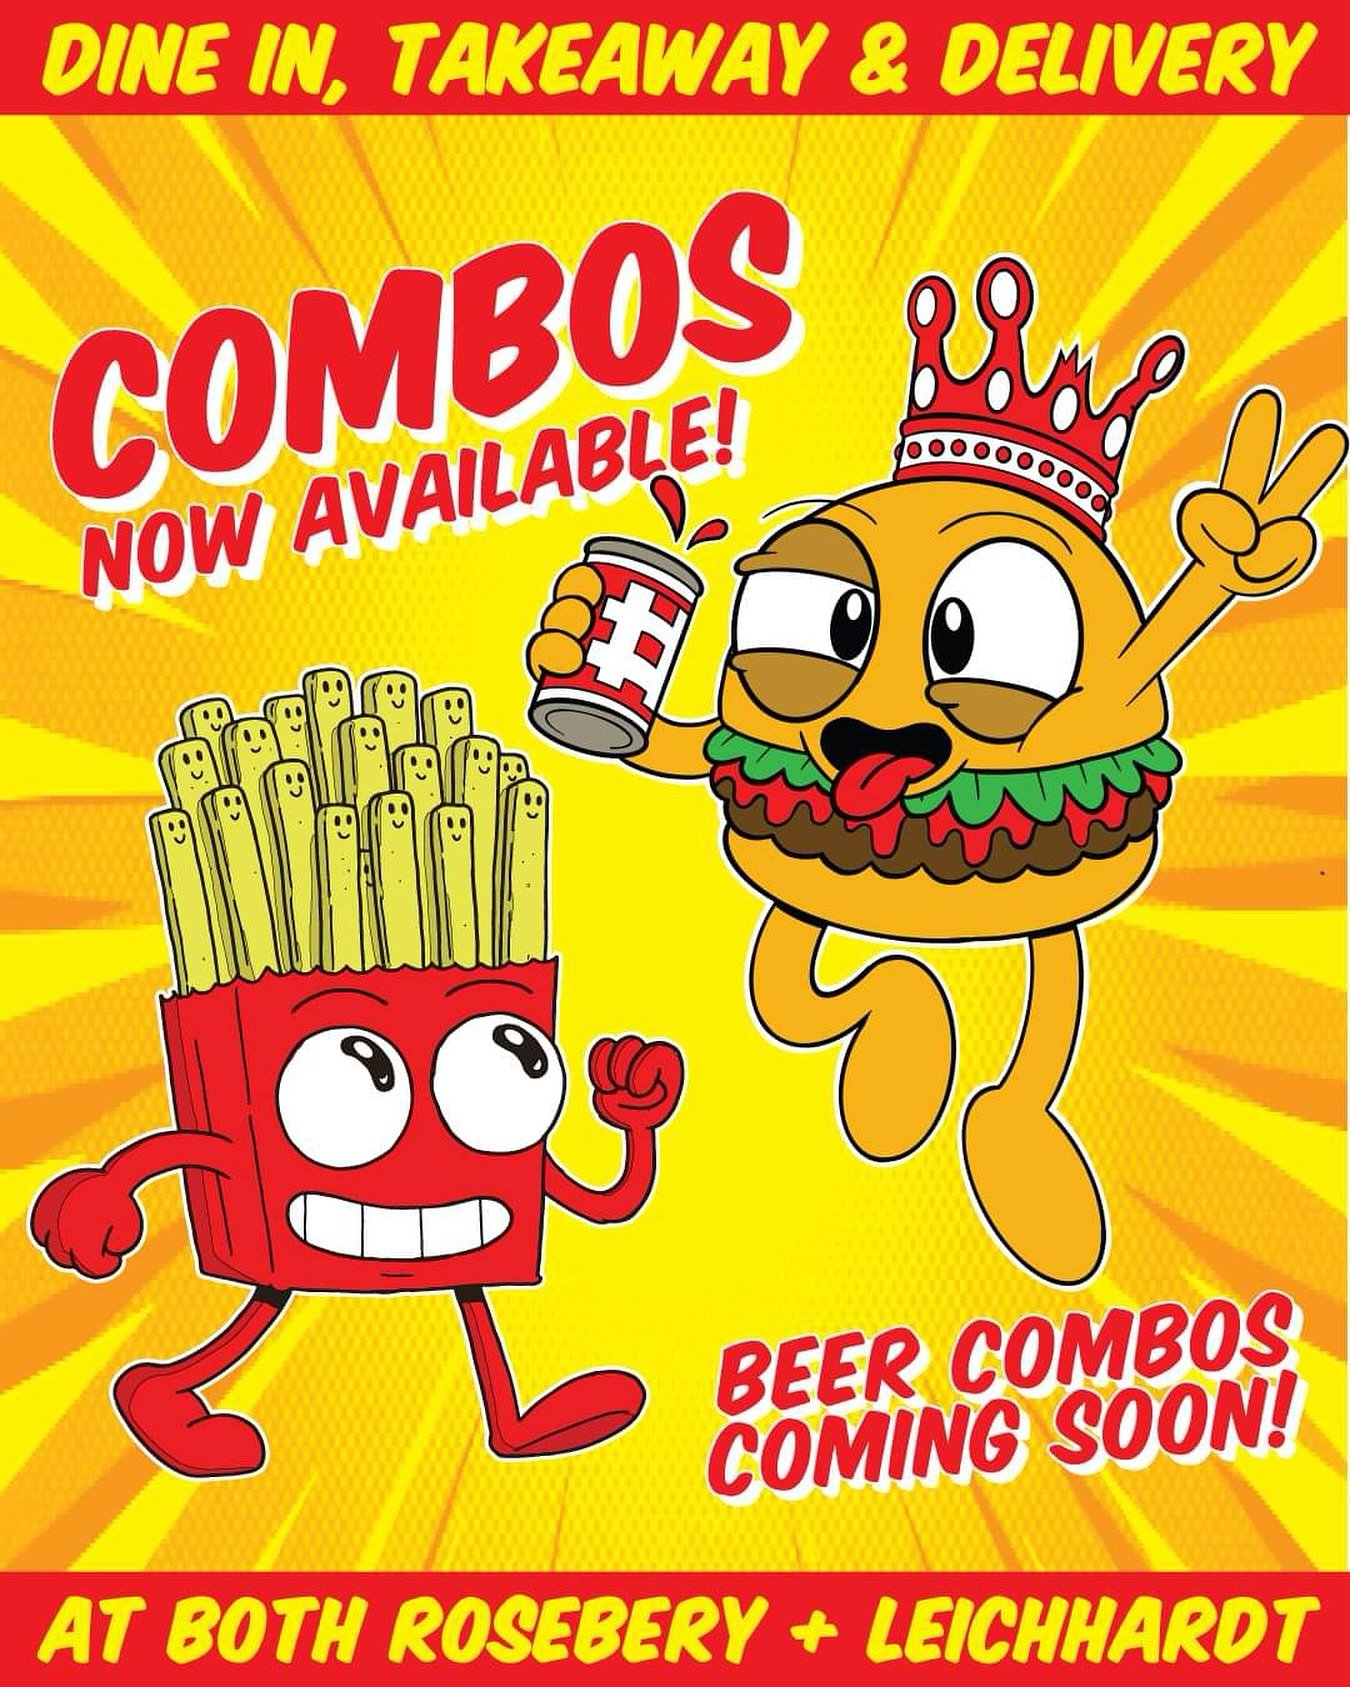 COMBOS ARE NOW LIVEEE FOR DINE IN, TAKE AWAY AND DELIVERYYYY!!! 🚨🚨🚨

BOOOZEY COMBOS ARE COMING SOOOON!! 🧨🧨🧨